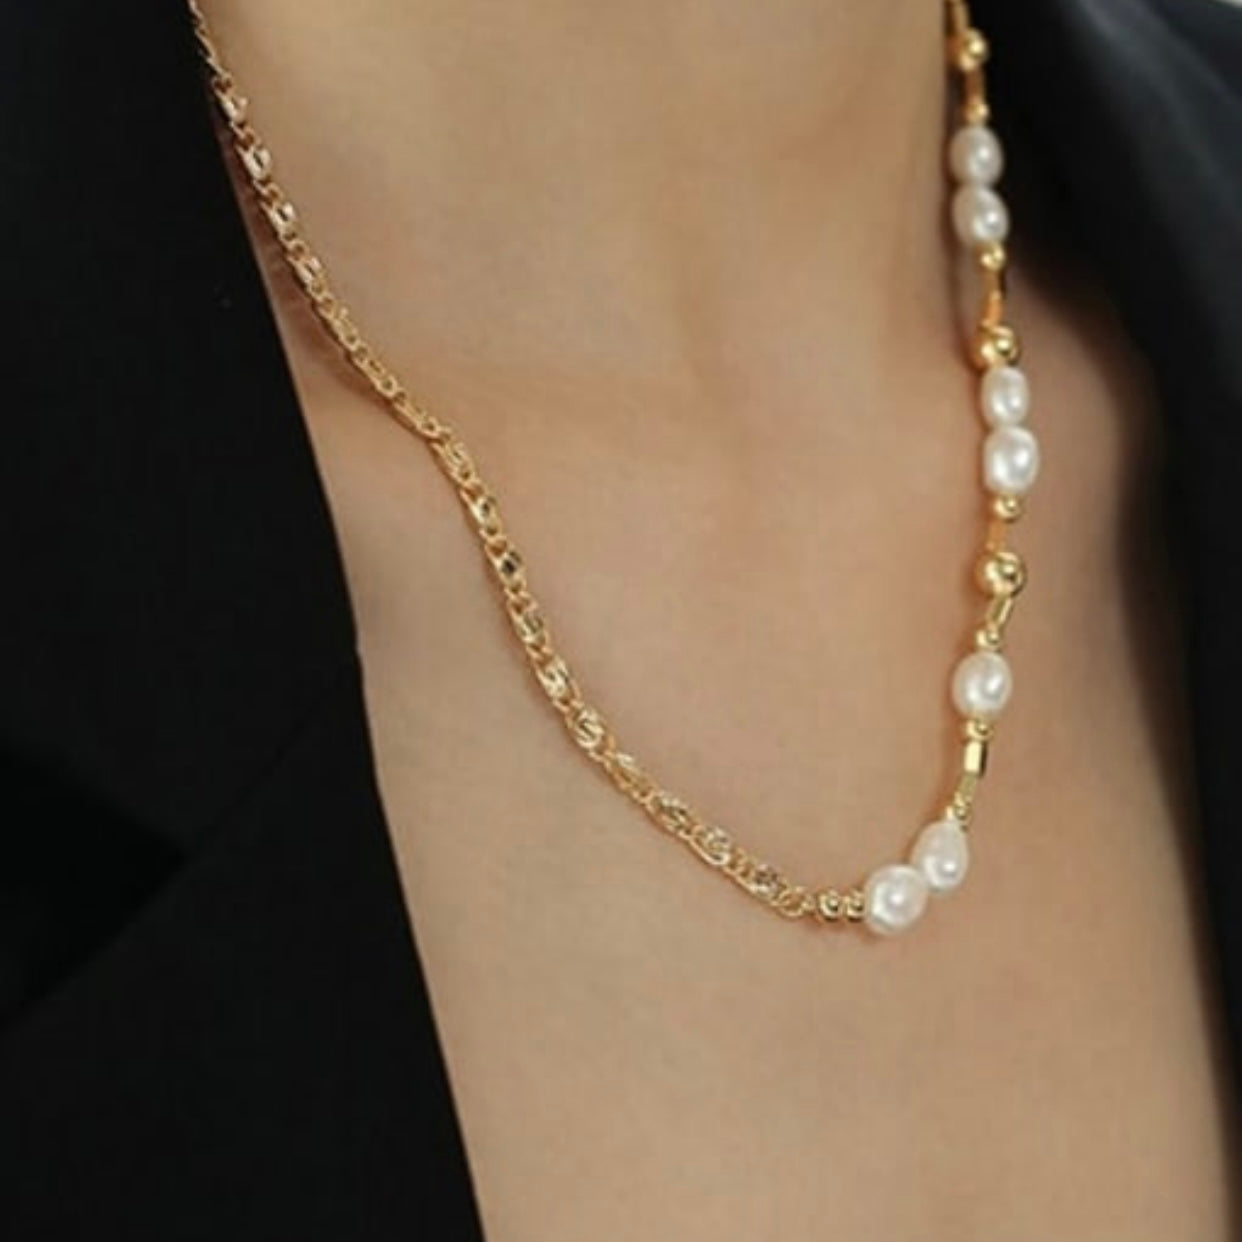 ISABELLA LINK CHAIN FRESHWATER PEARLS NECKLACE